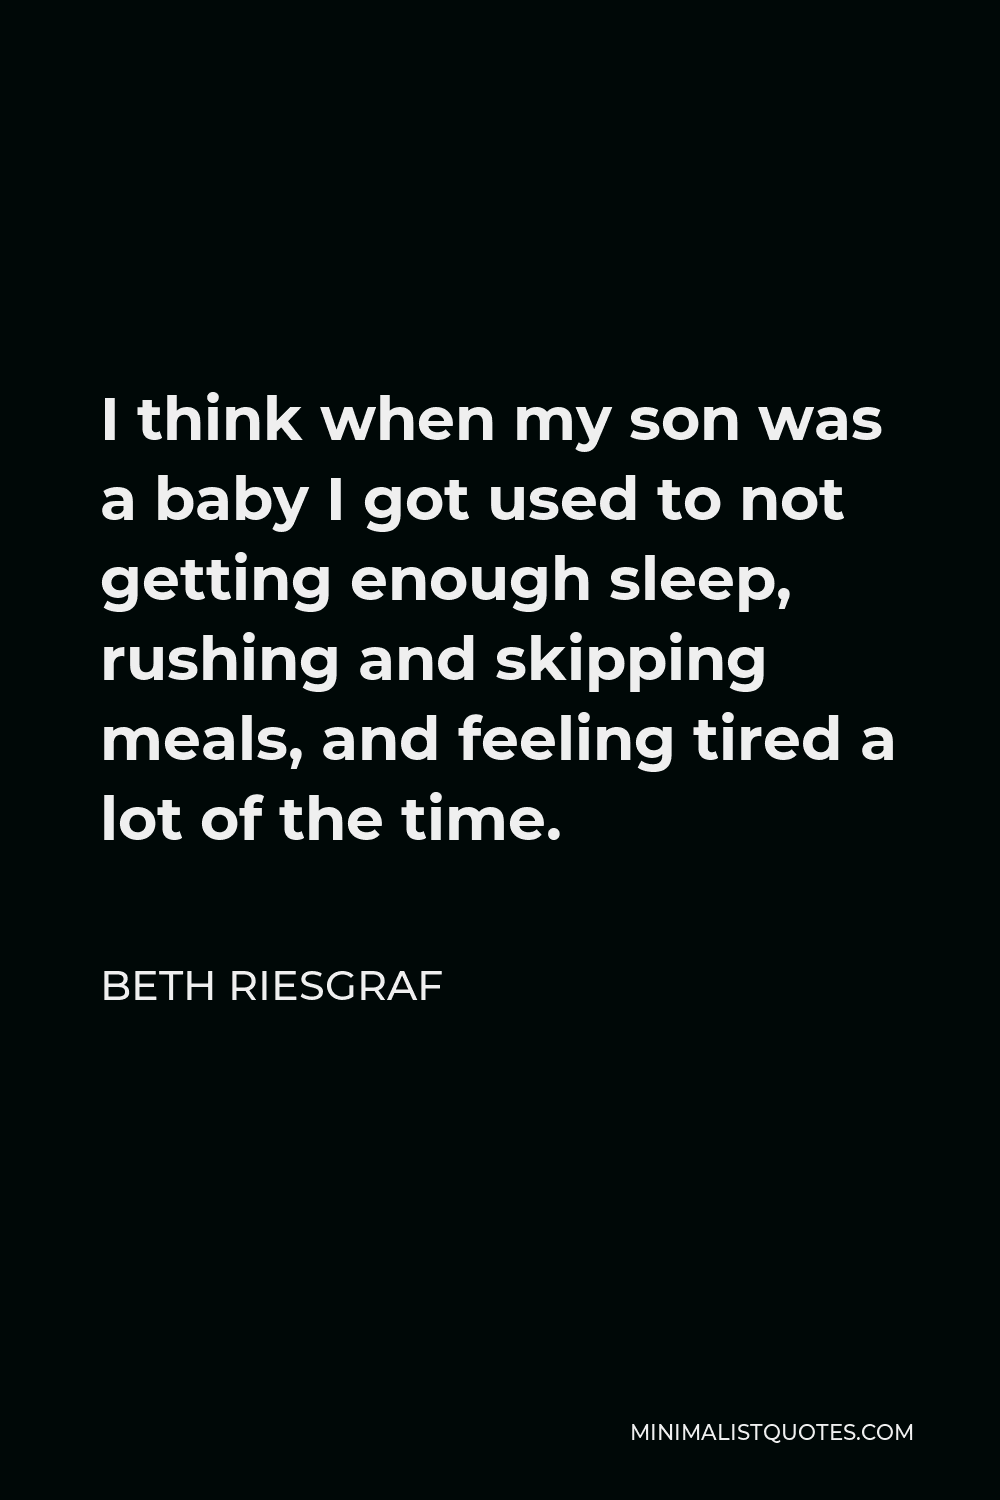 Beth Riesgraf Quote - I think when my son was a baby I got used to not getting enough sleep, rushing and skipping meals, and feeling tired a lot of the time.